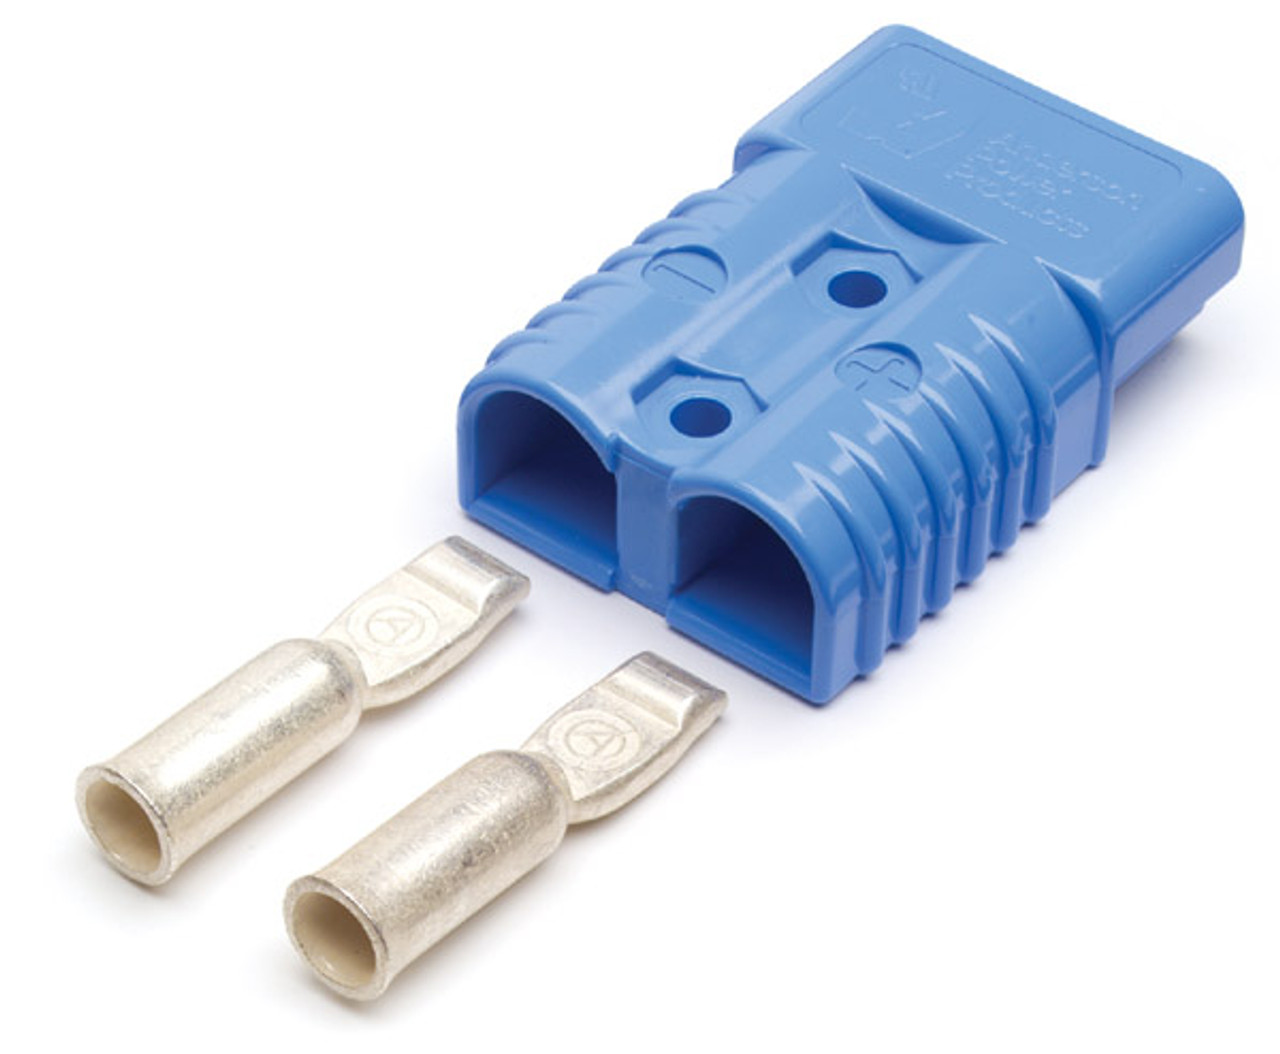 4 AWG 175A Plug-In Style Battery Cable Connectors Plug-In End - Blue  84-9551